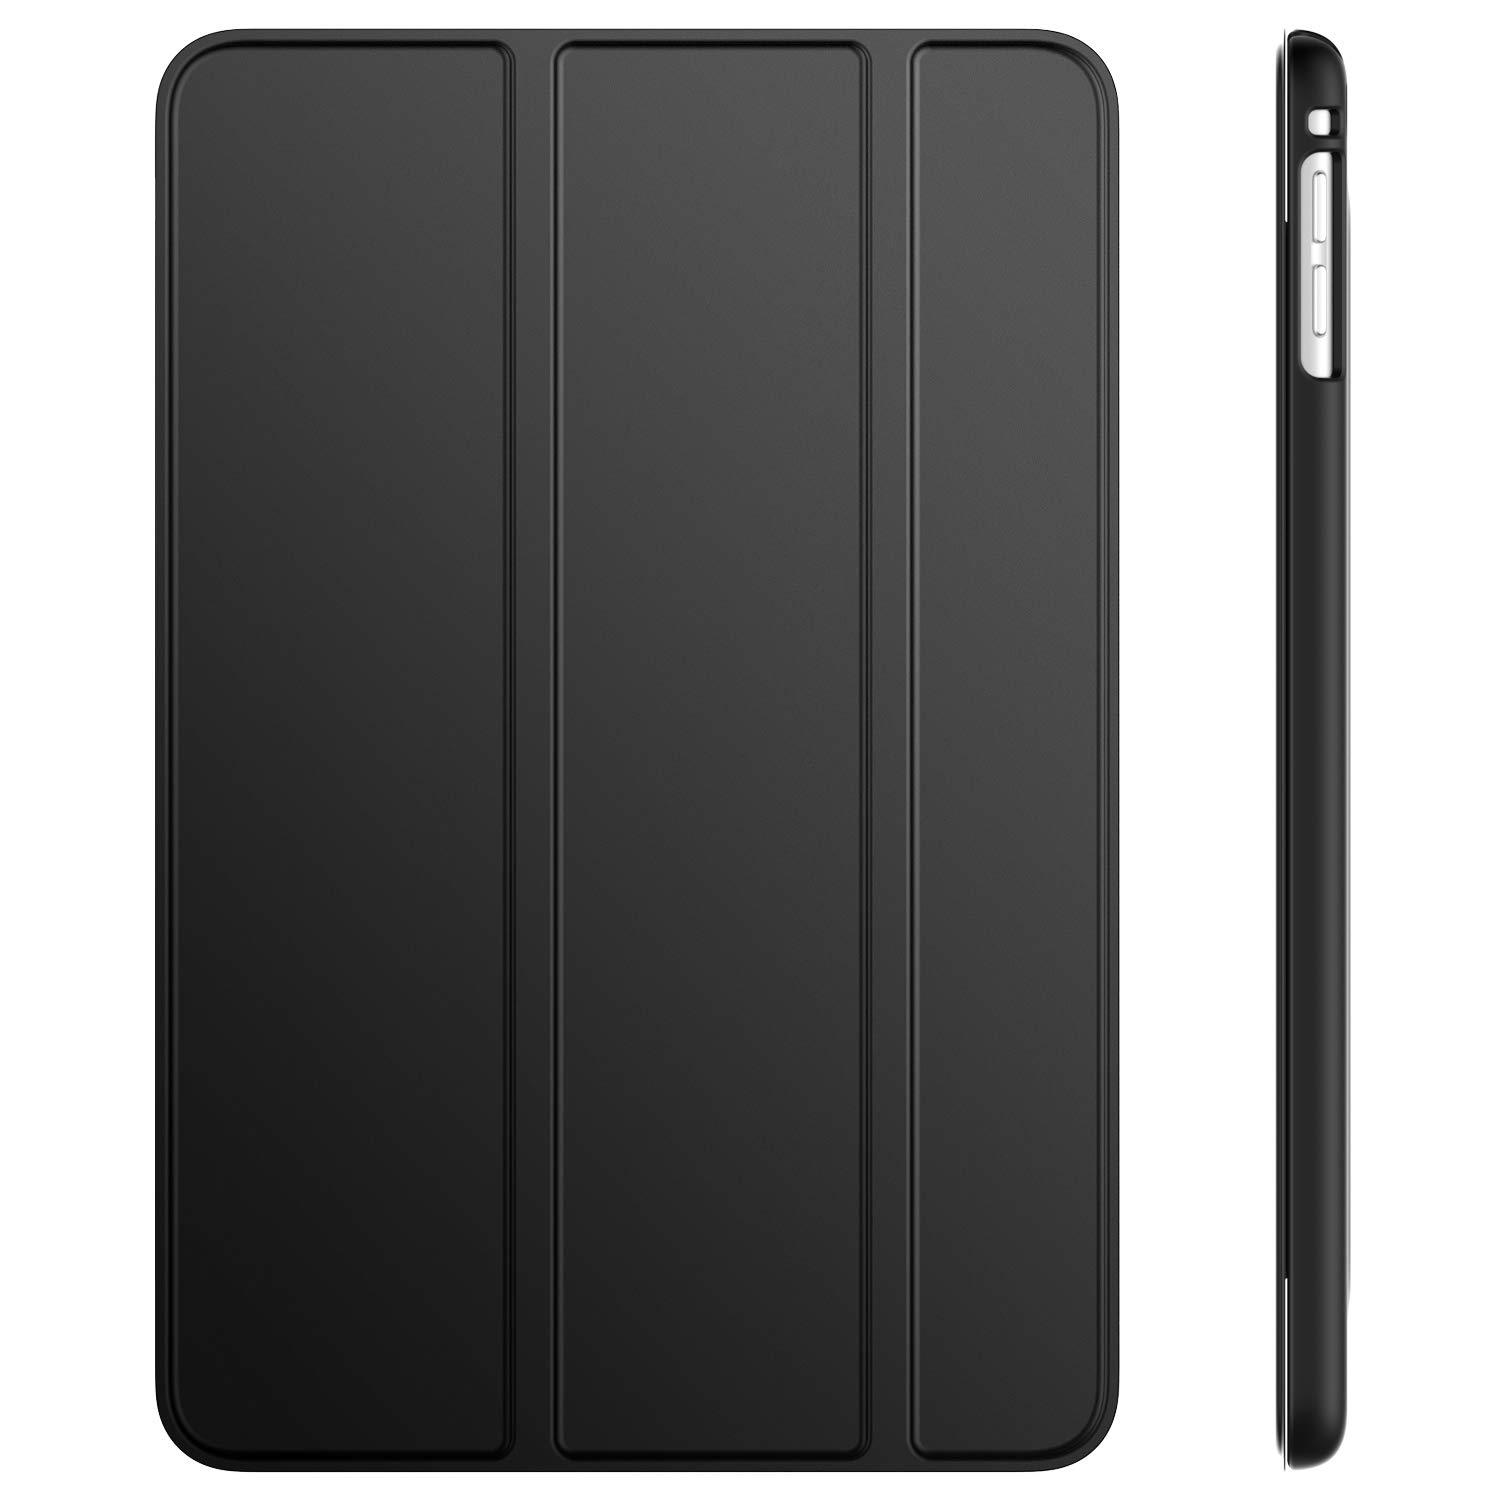 JETech Case for Apple iPad Mini 5 (2019 Model 5th Generation), Smart Cover with